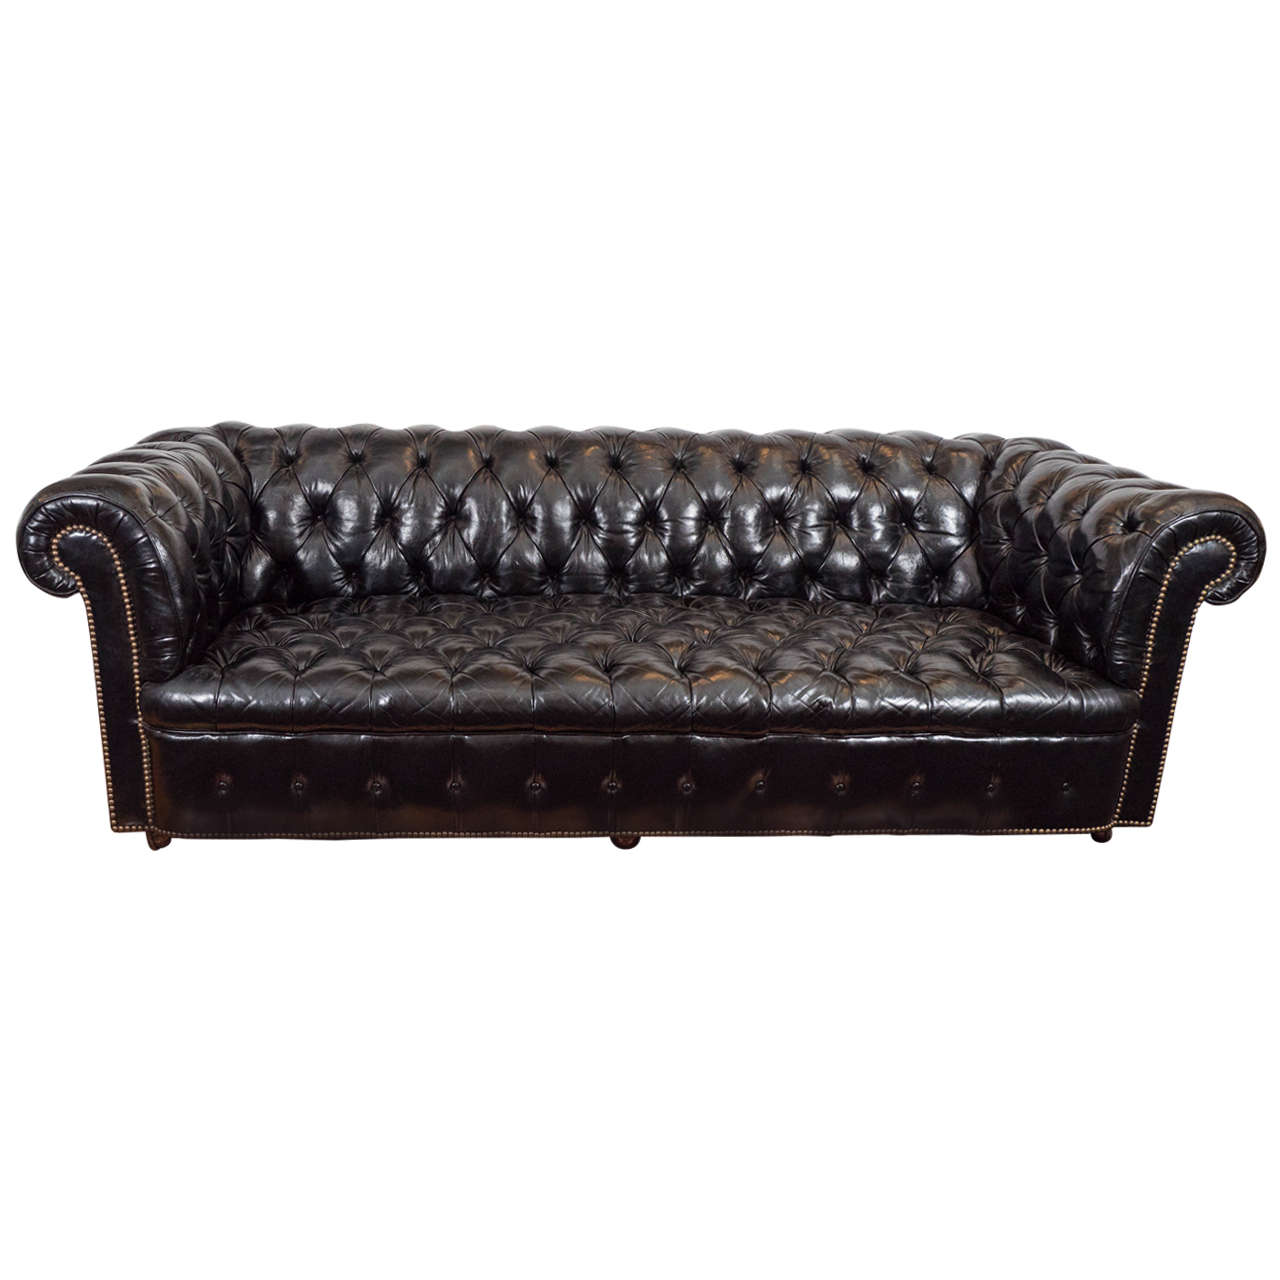 Midcentury Chesterfield Sofa in Tufted Black Leather